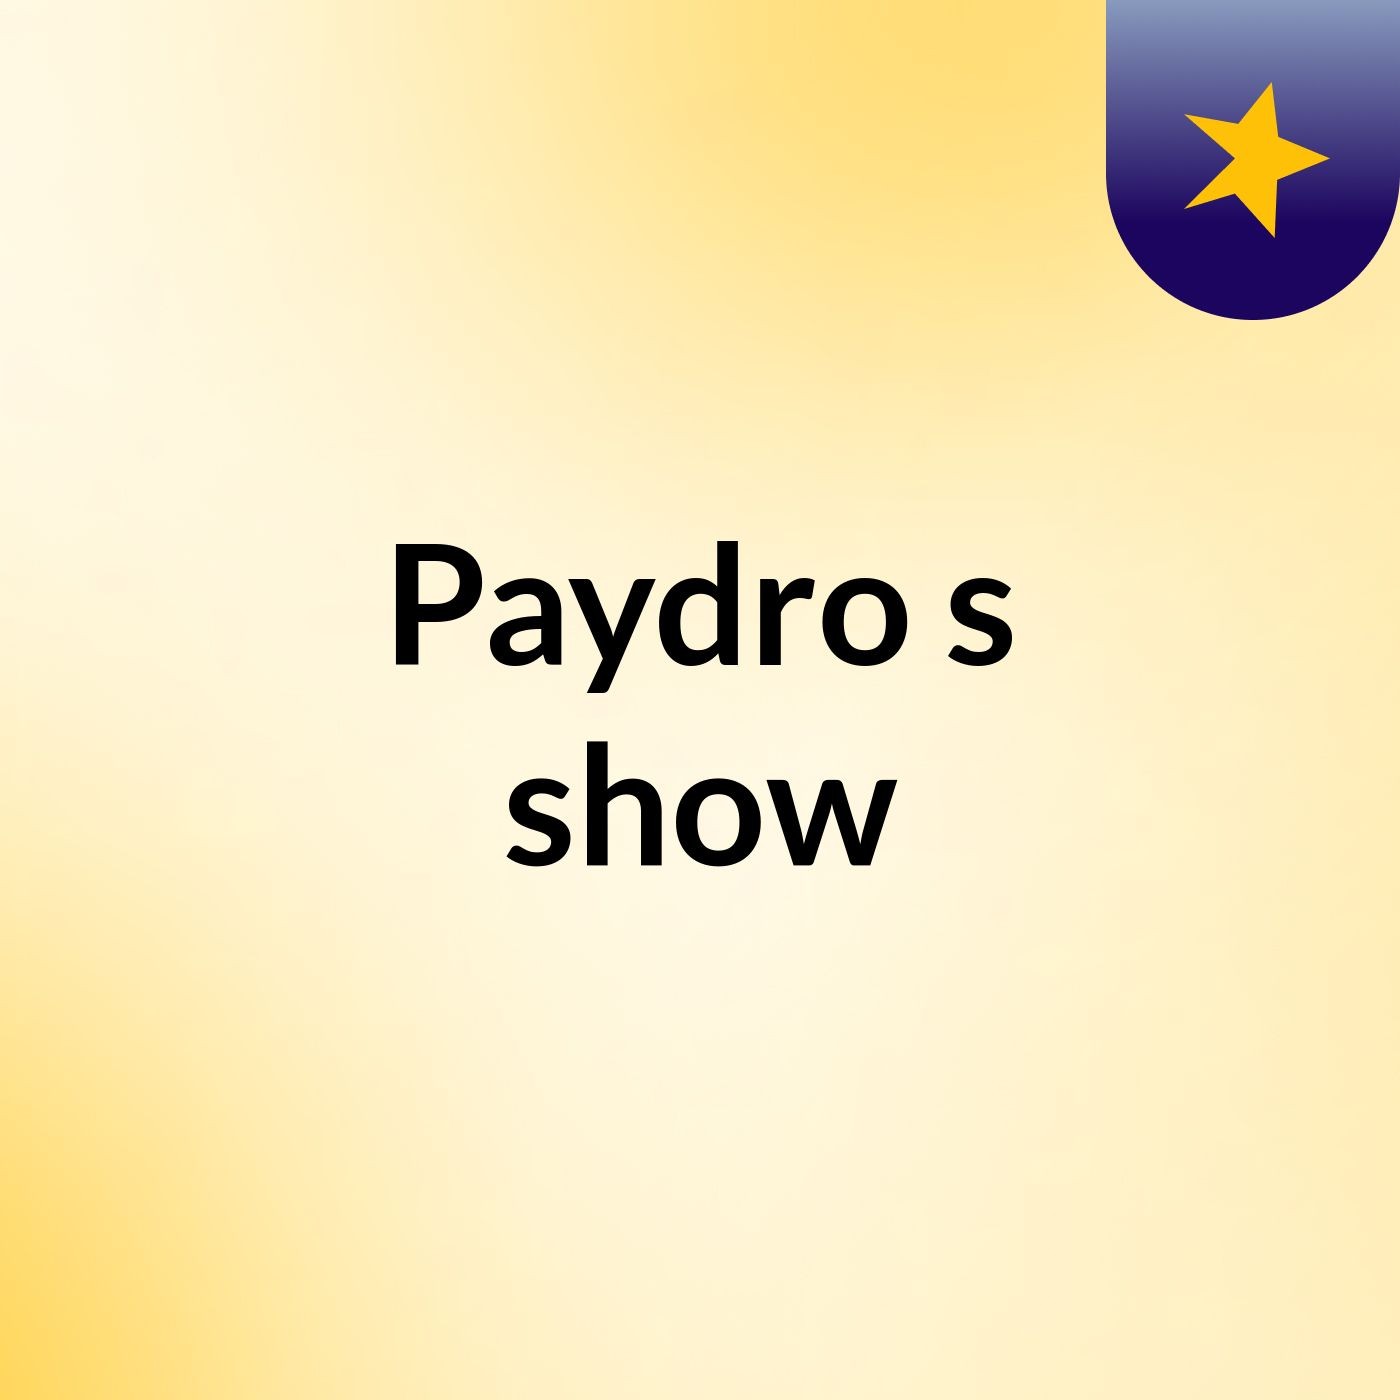 Paydro's show